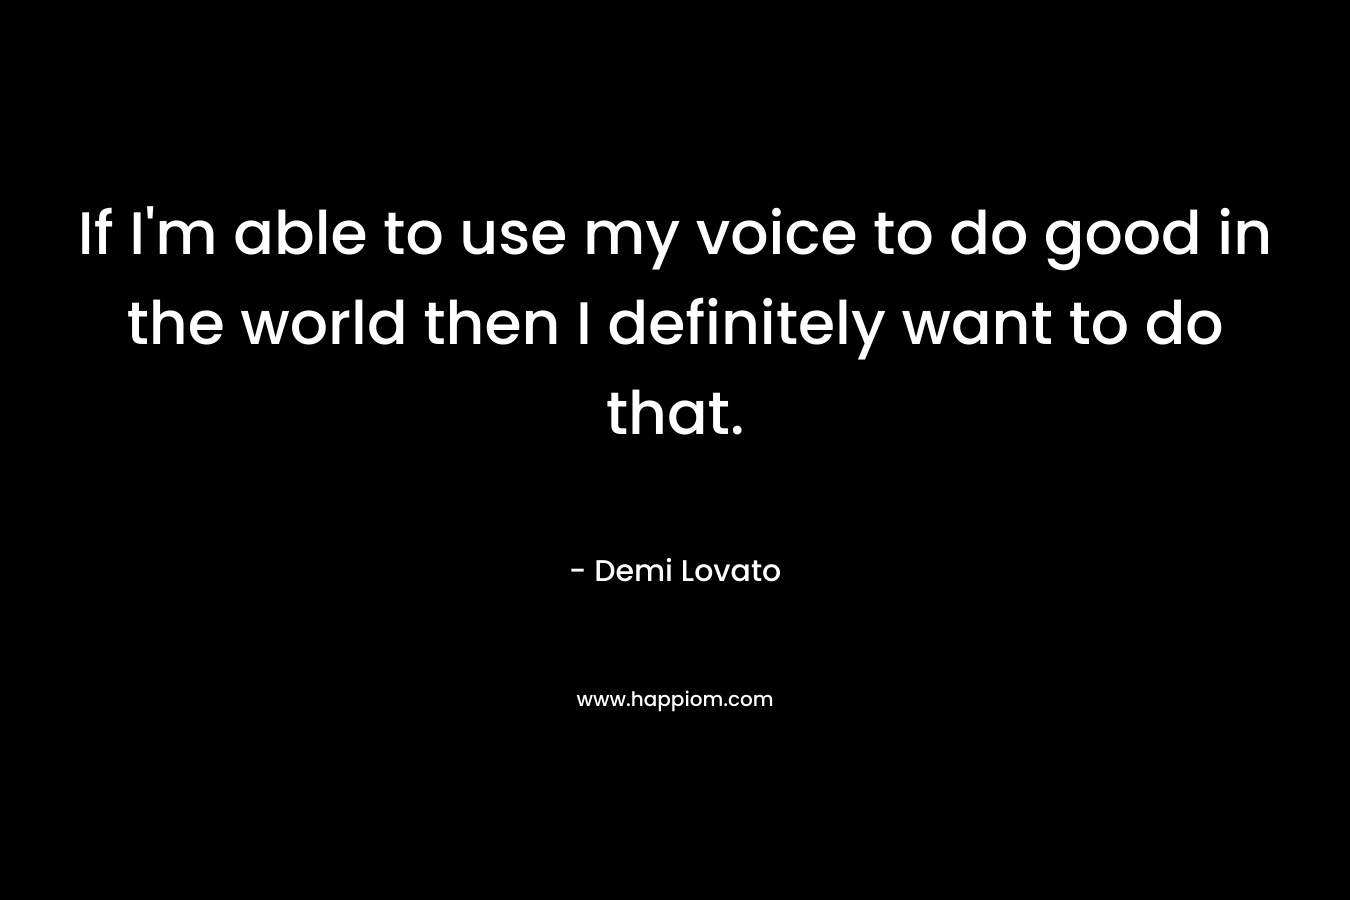 If I'm able to use my voice to do good in the world then I definitely want to do that.